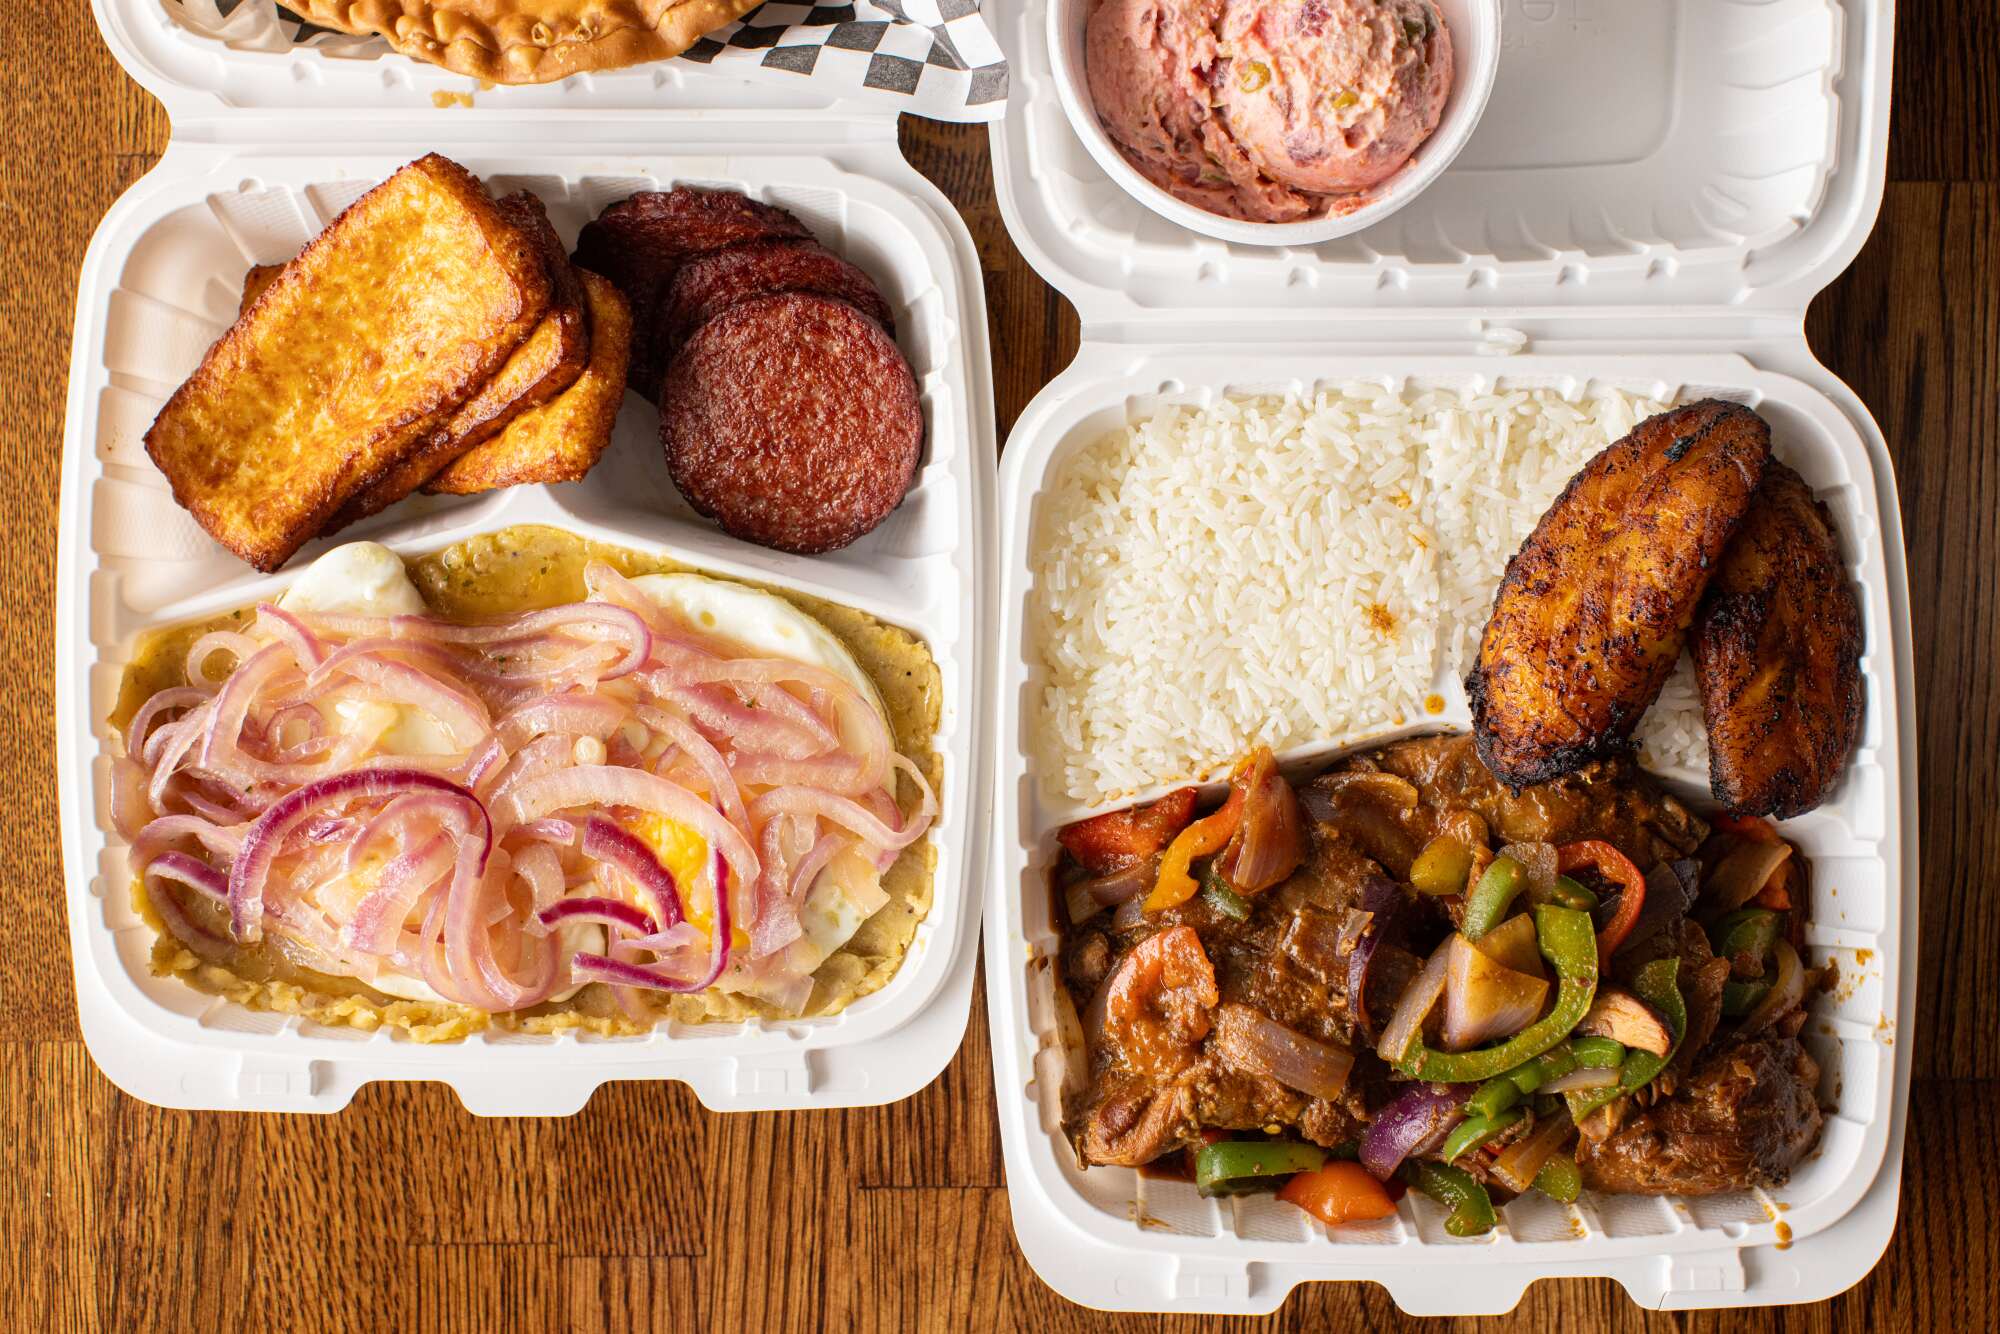 Takeout boxes with Dominican breakfast and chicken dishes.